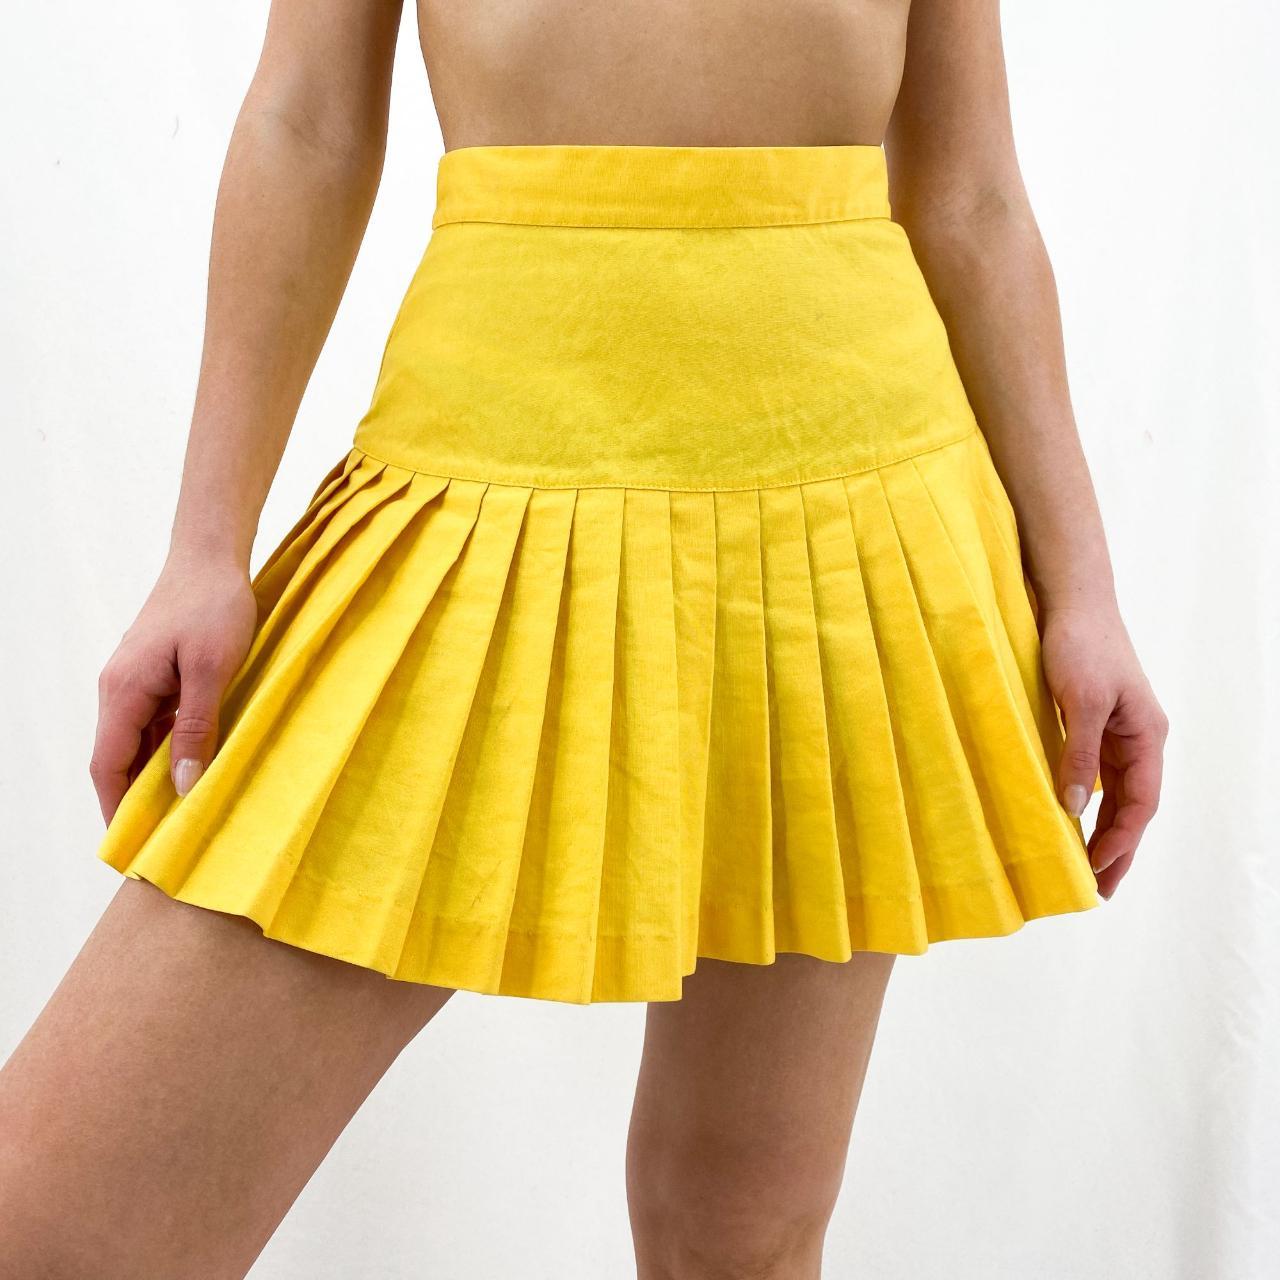 Product Image 1 - [#8091]

Y2k Vintage Yellow Pleated Skater